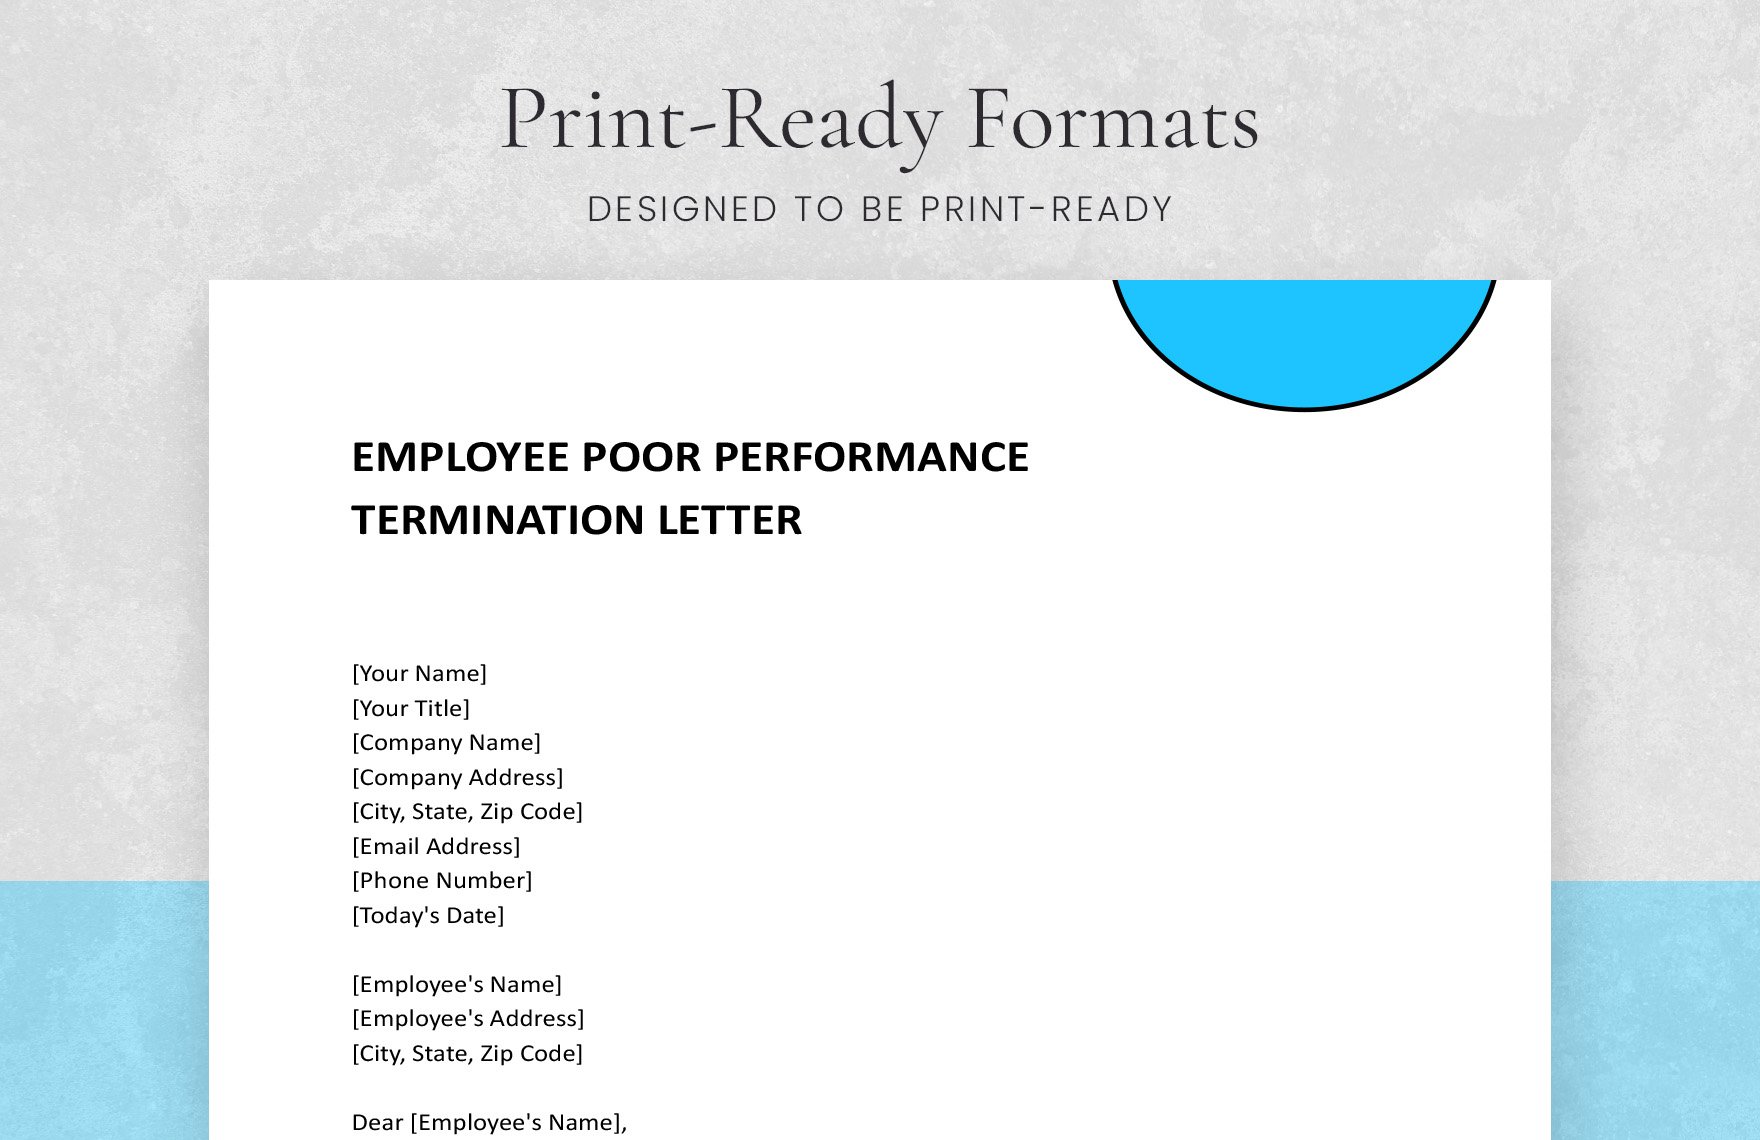 Employee Poor Performance Termination Letter